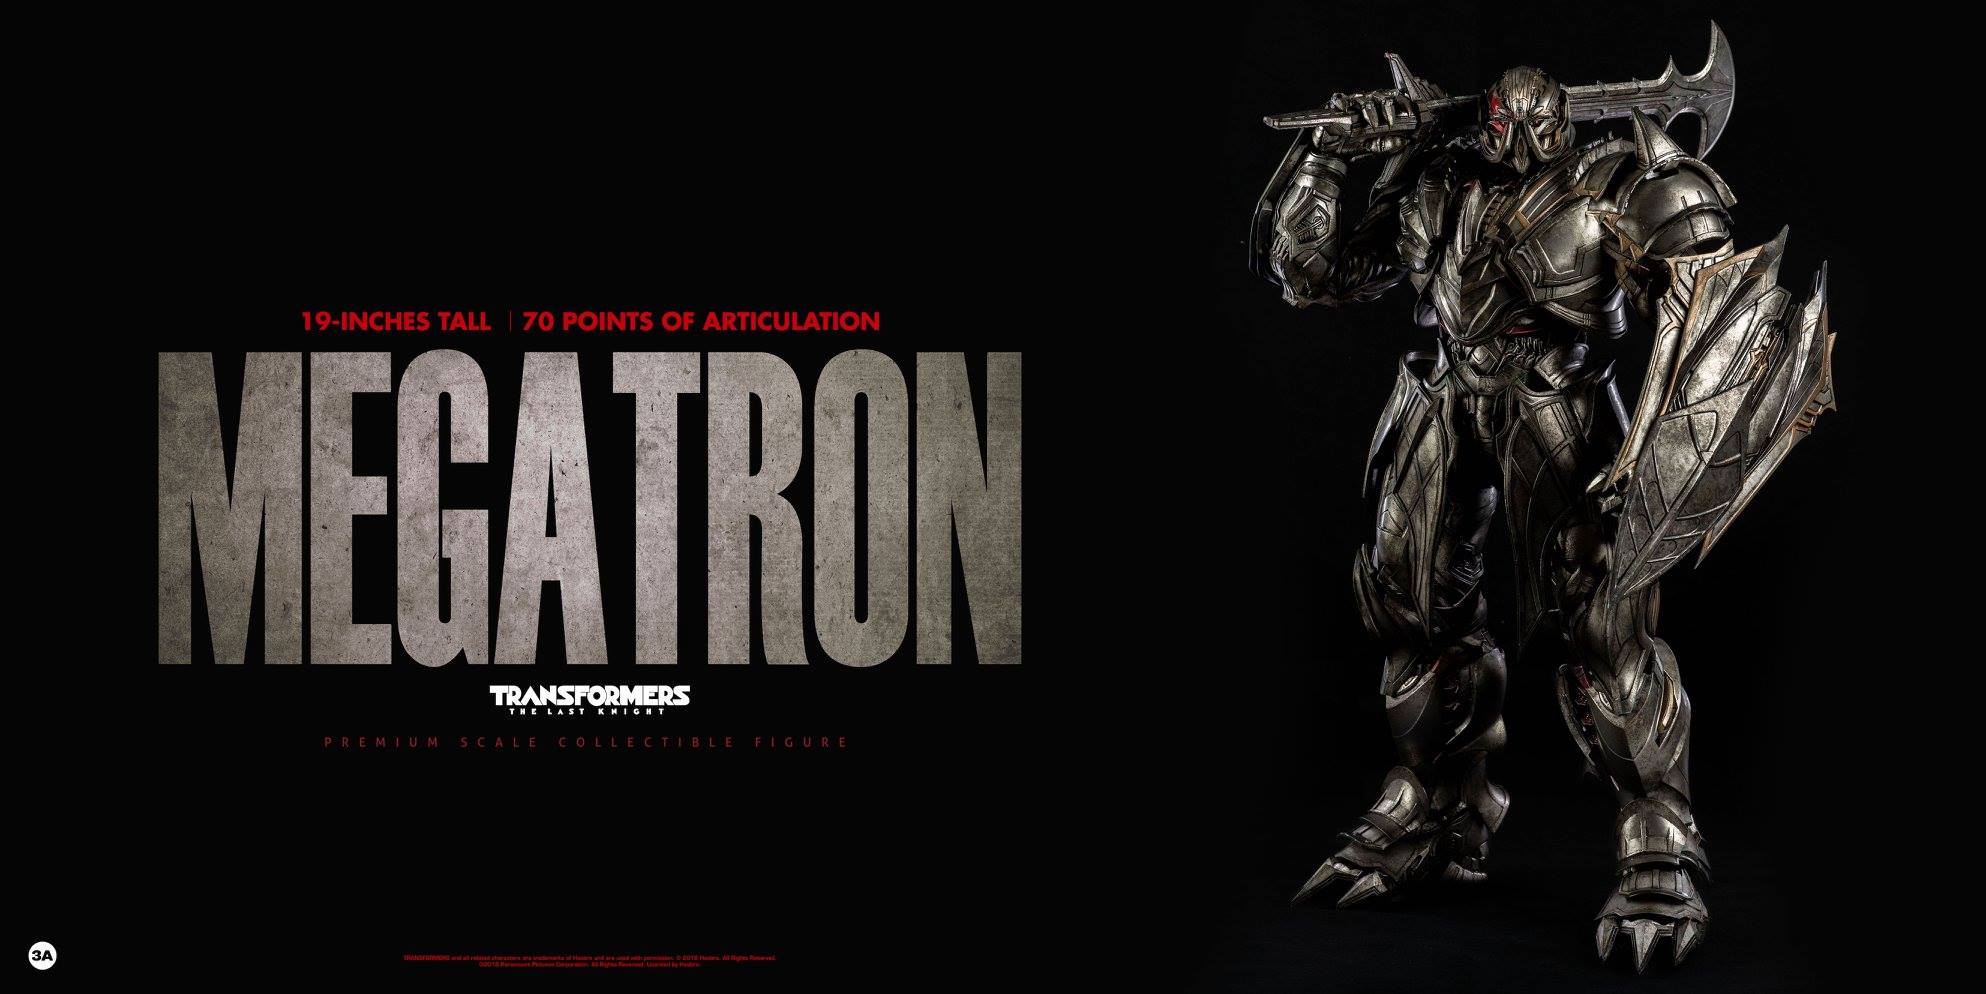 ThreeA - Premium Scale Collectible Series - Transformers: The Last Knight - Megatron (Deluxe) - Marvelous Toys